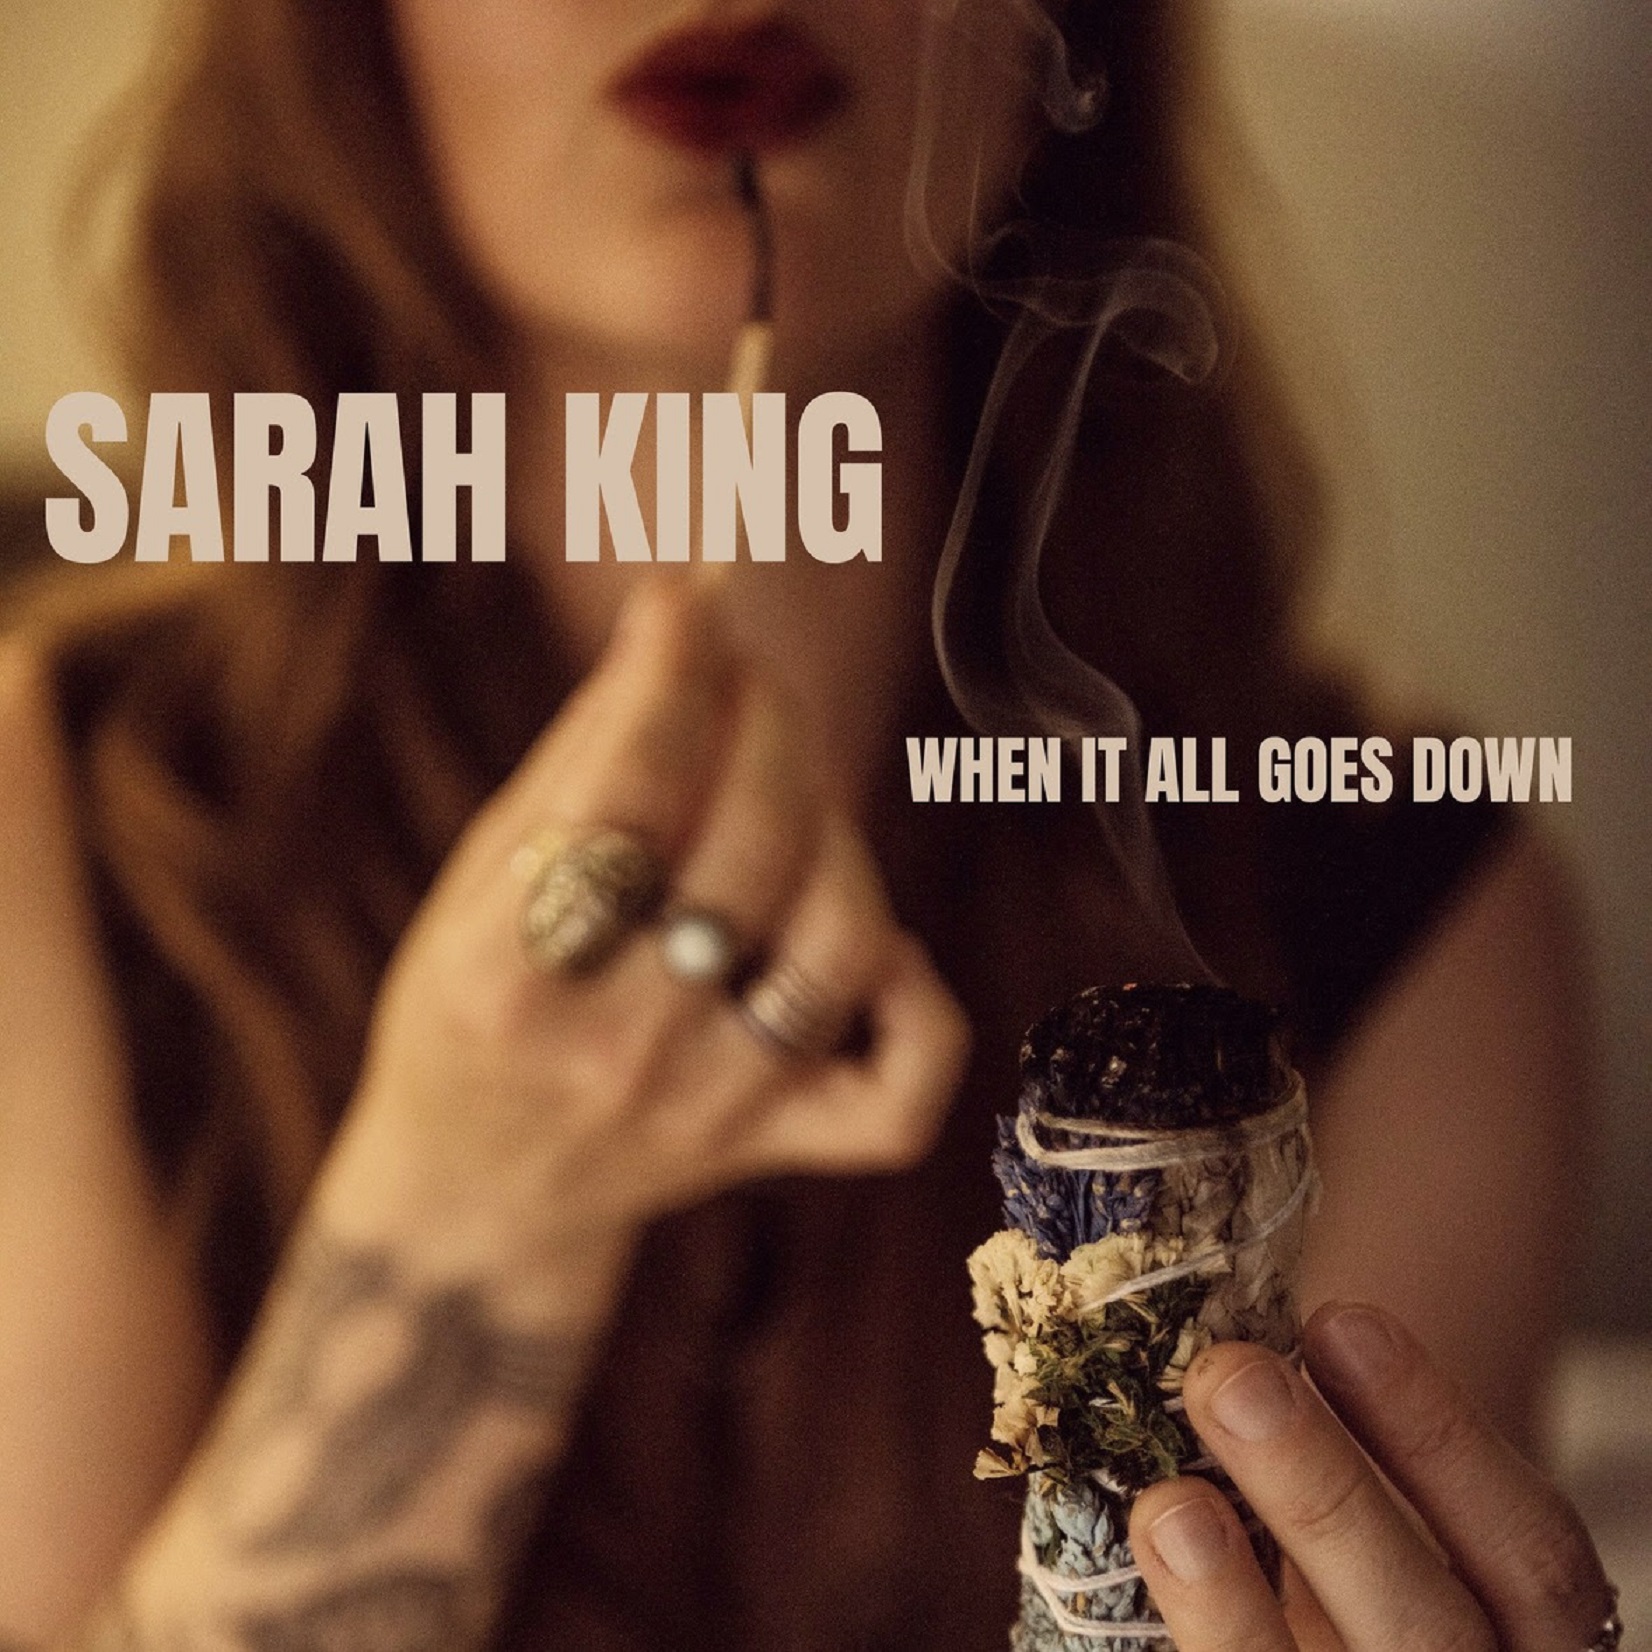 OUT NOW: WHEN IT ALL GOES DOWN by SARAH KING